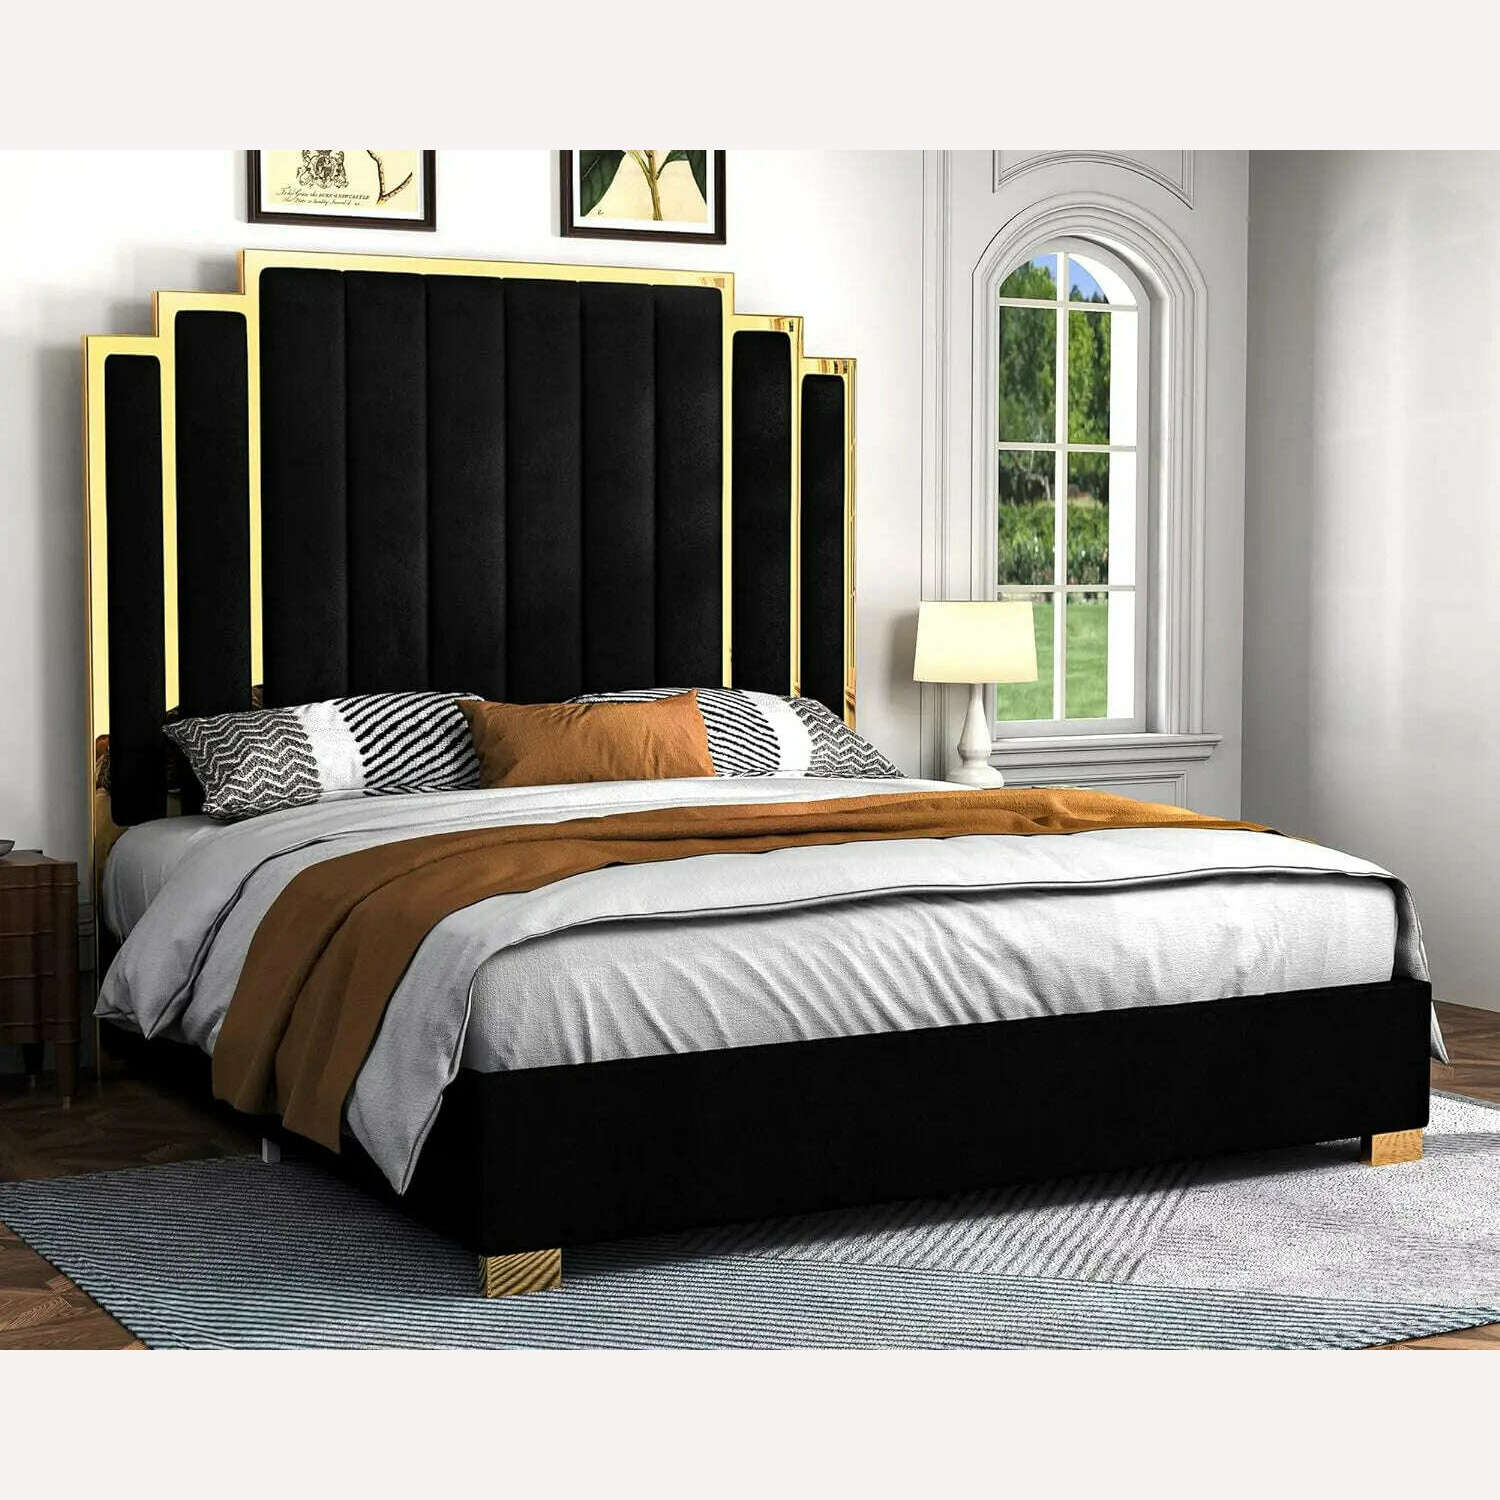 KIMLUD, Bed Frame, 61.4" Velvet Upholstered Bed with Gold Accent Headboard, Wood Slats, Queen Platform Bed, Black / United States / Queen, KIMLUD Womens Clothes